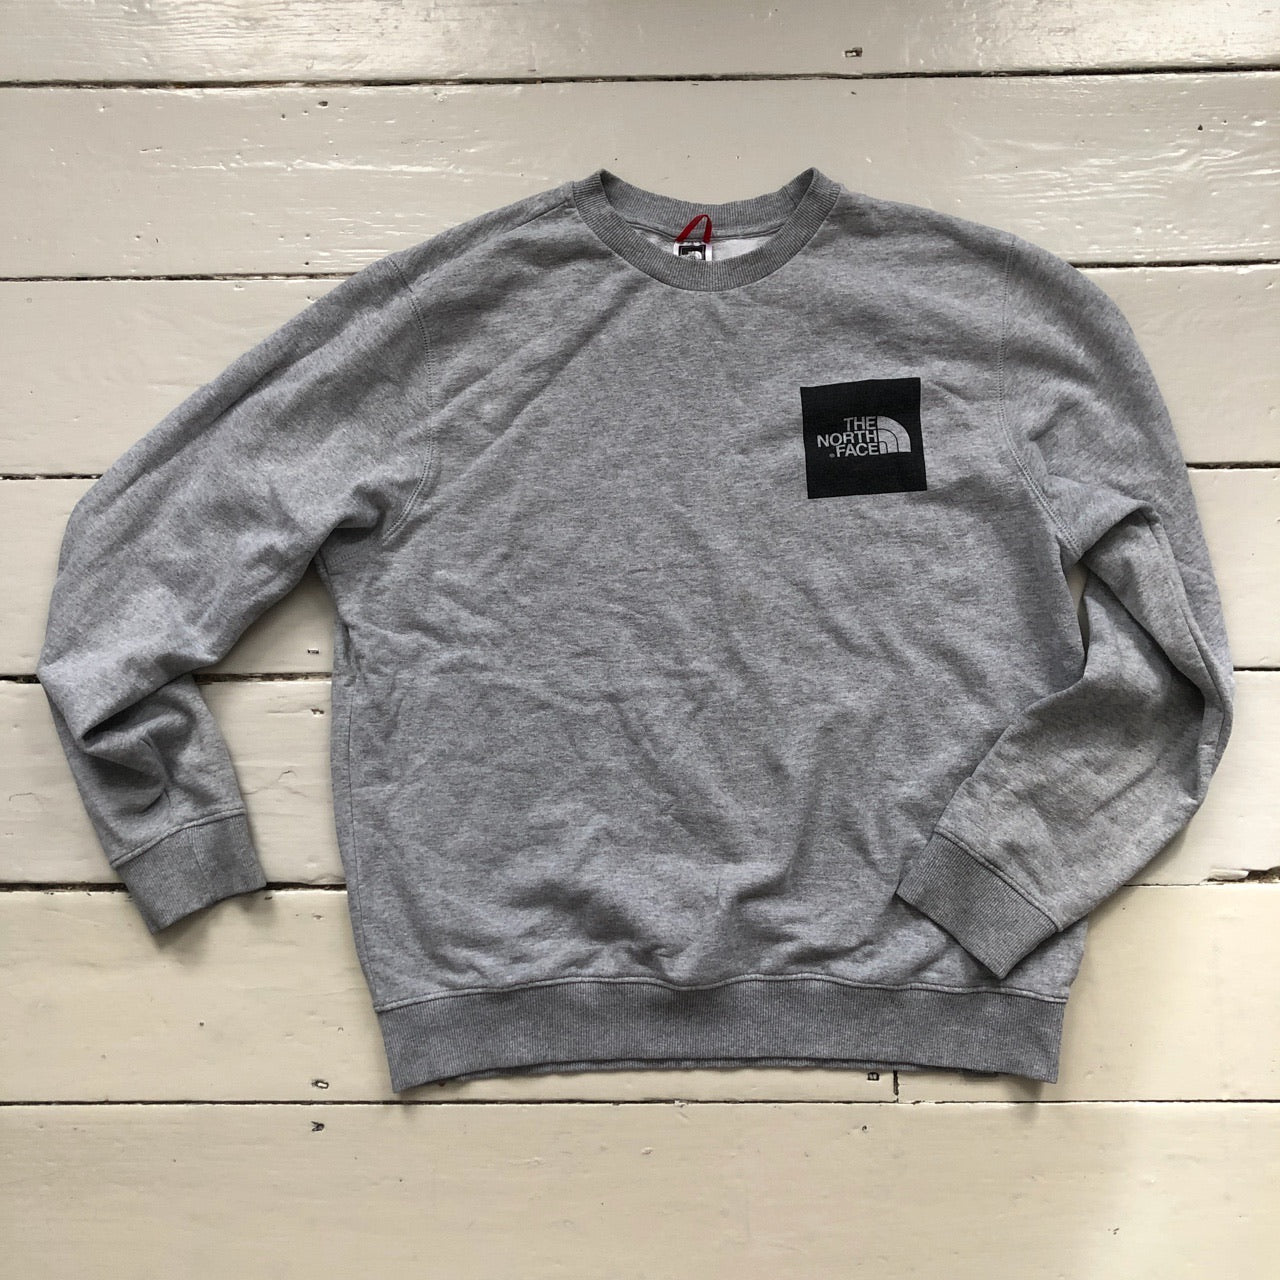 The North Face Grey Jumper (Large)